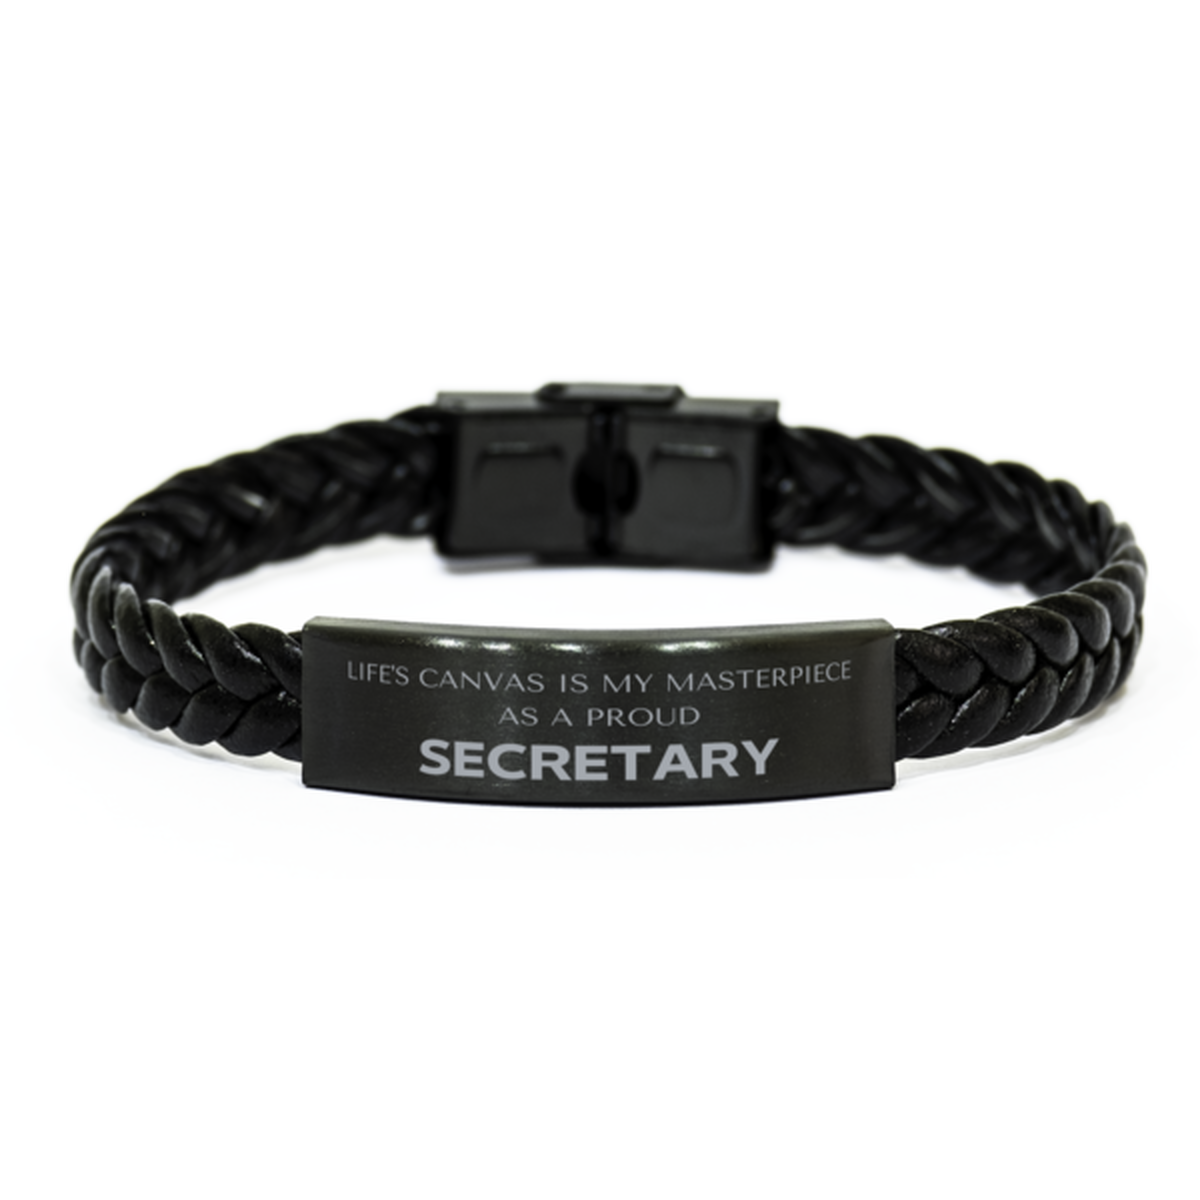 Proud Secretary Gifts, Life's canvas is my masterpiece, Epic Birthday Christmas Unique Braided Leather Bracelet For Secretary, Coworkers, Men, Women, Friends